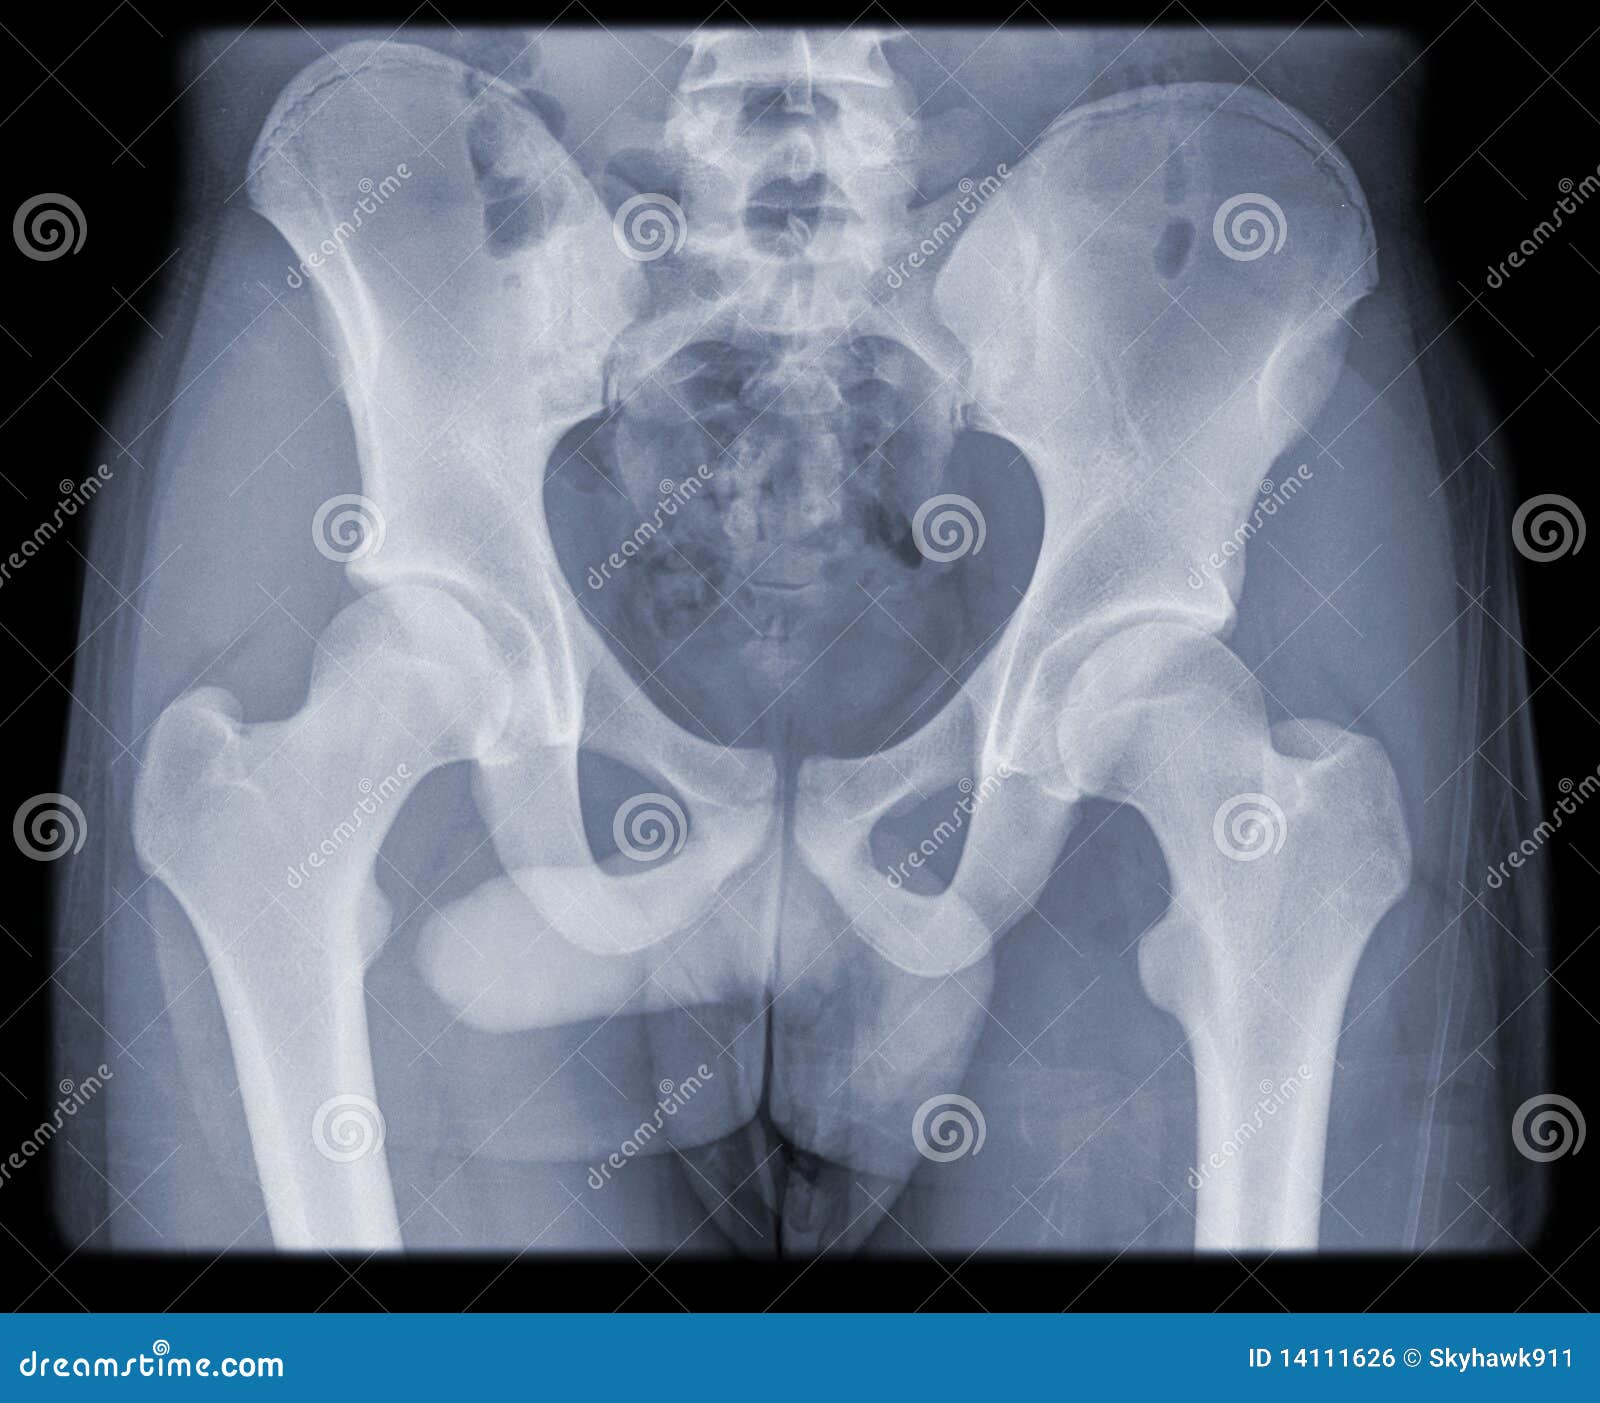 Regular Hip And Pelvis Of Young Man Royalty Free Stock Image - Image